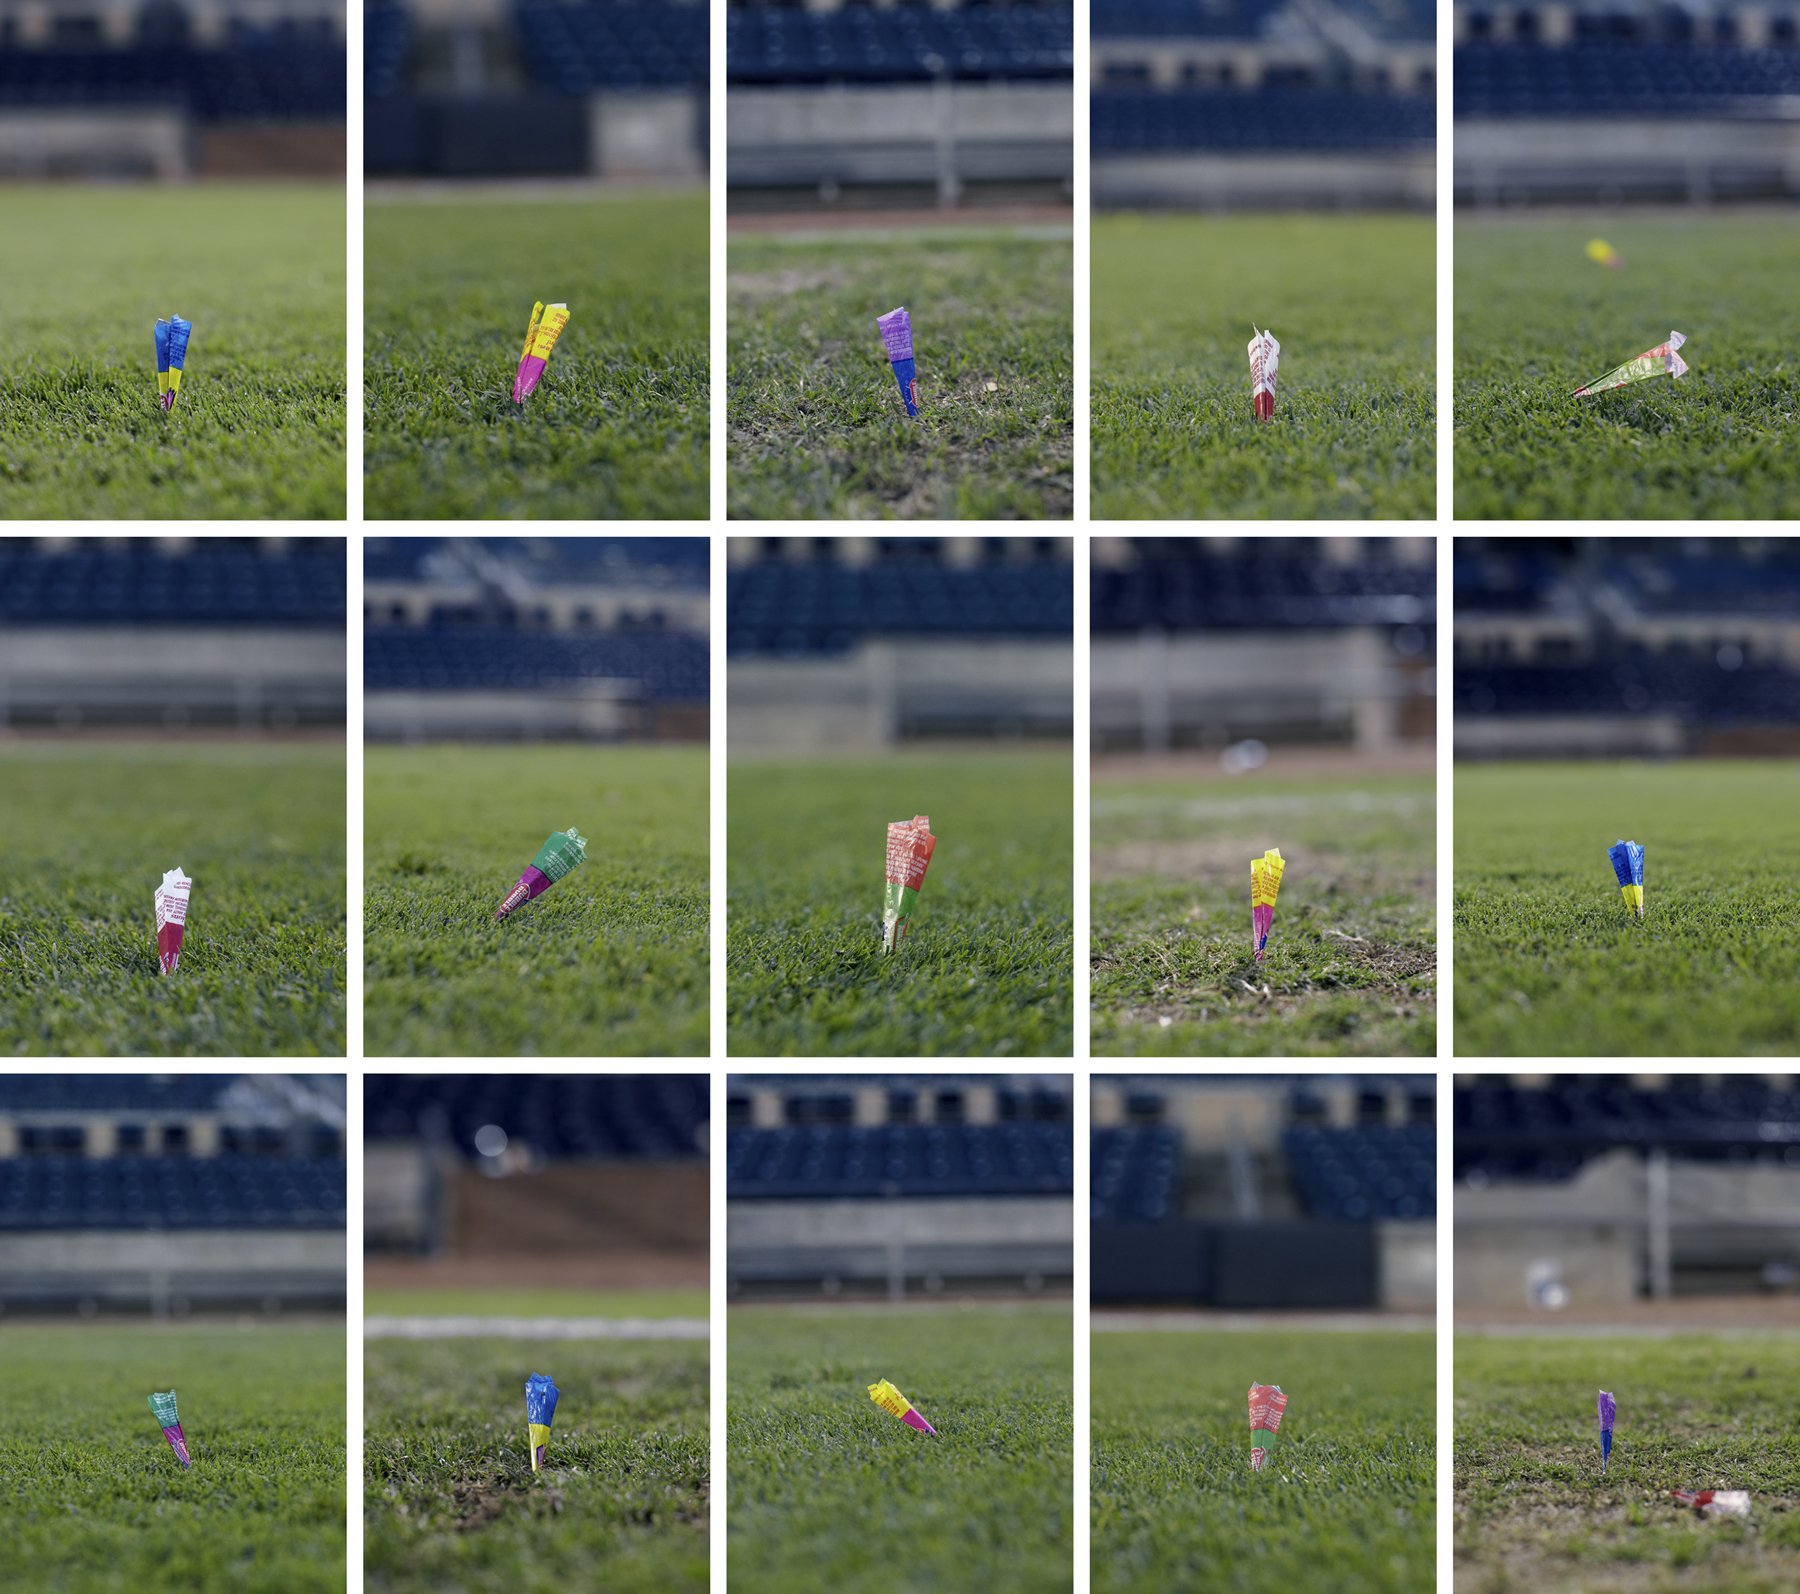   The Field of Play, 2013   Archival inkjet print  42 1/2 x 49 inches  Edition of 8 